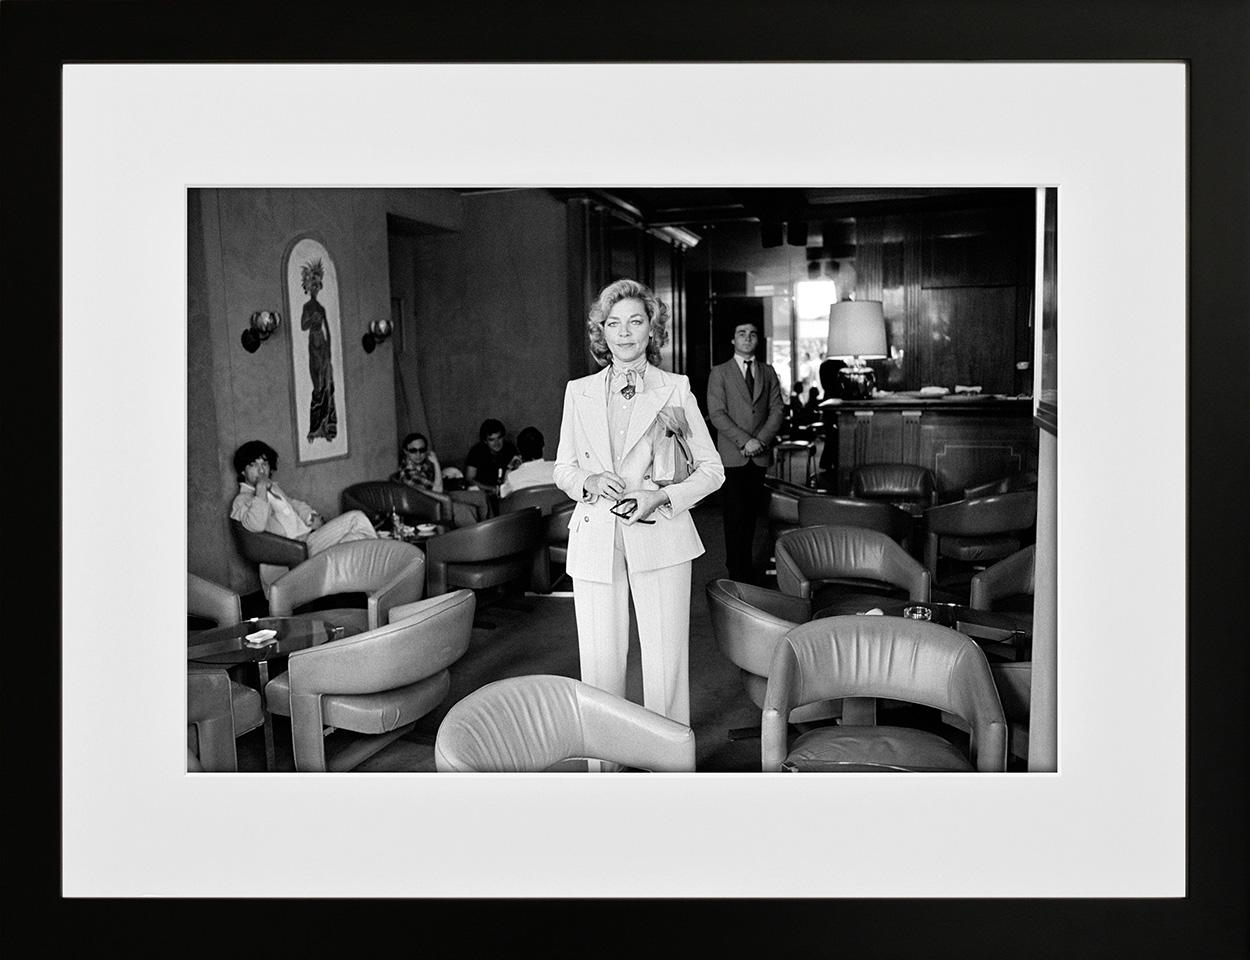 Lauren Bacall, Majestic Hotel, Cannes, 1979

I covered the Cannes Film Festival for many, many years. I was staying at The Majestic Hotel this particular year,  and as I glanced across the bar I caught the eye of Lauren Bacall, she looked so stylish